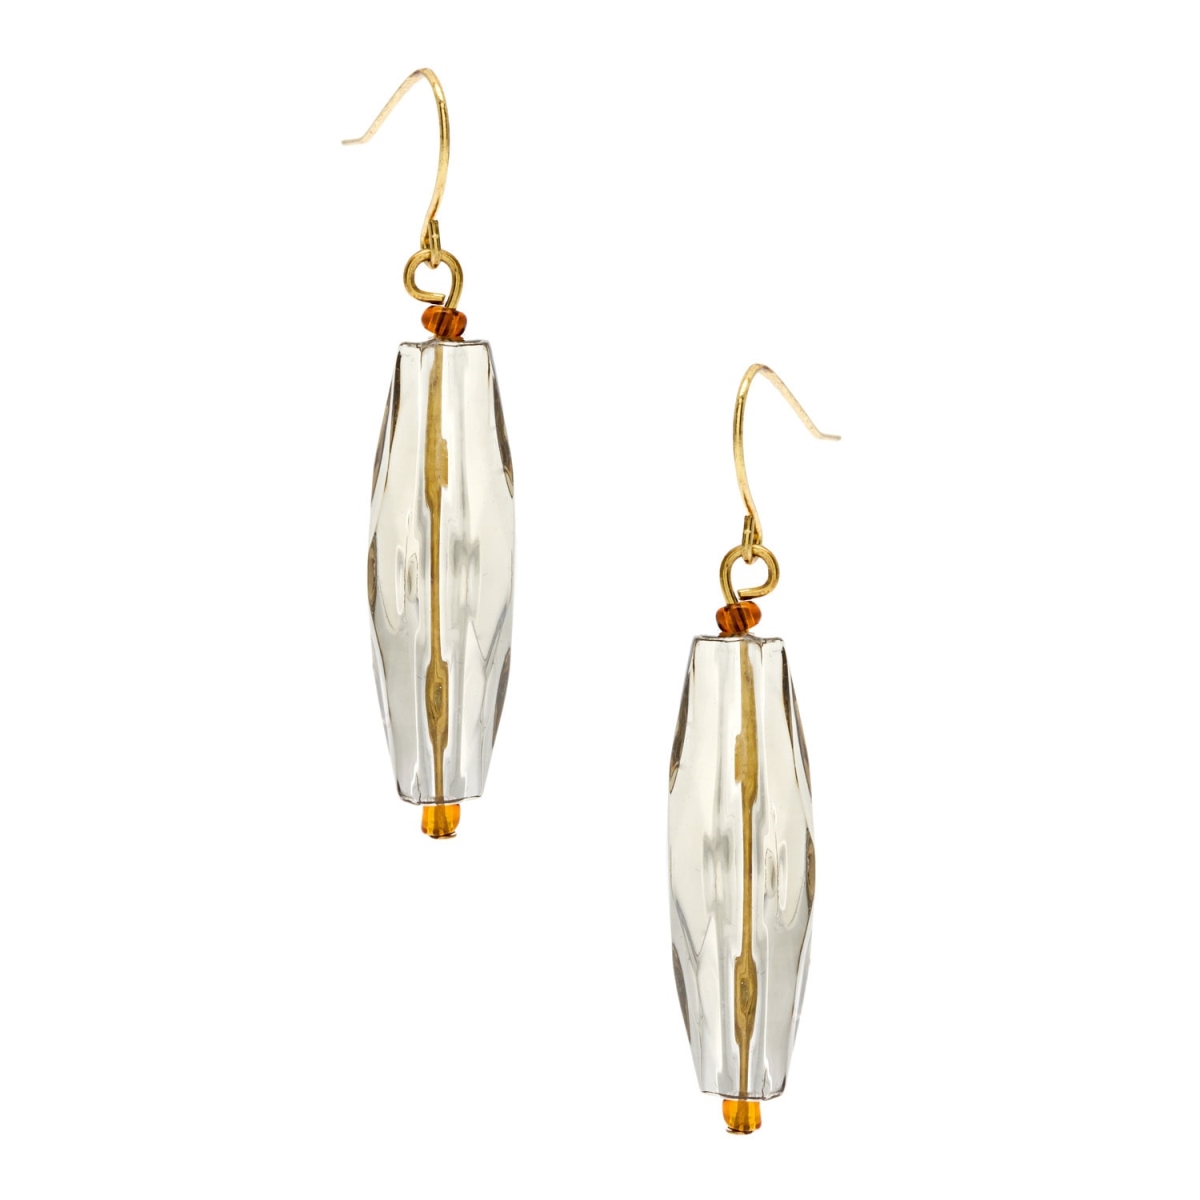 Picture of Alexa Starr 4299/E Goldtone Clear Linear Lucite Drop Earrings - Gold